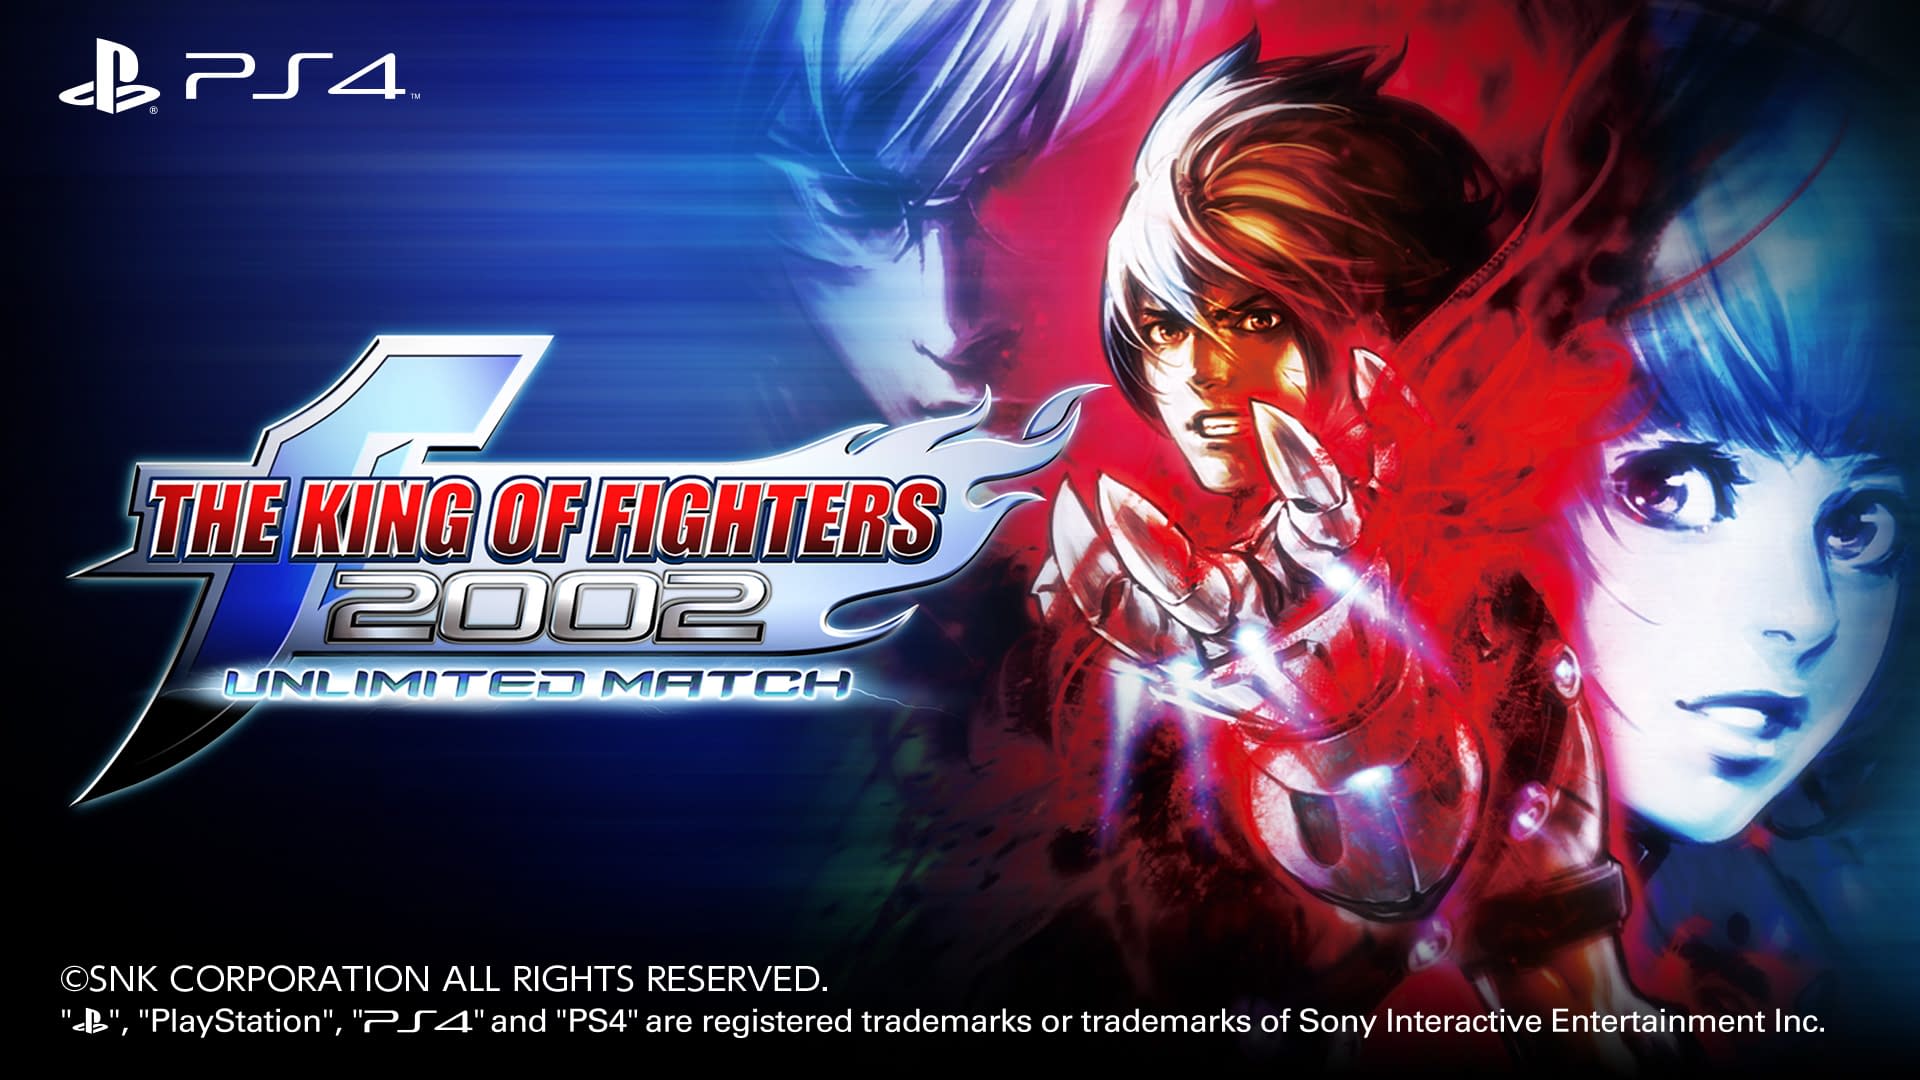 The King of Fighters 2002 throws down on PS4, Xbox One and Switch